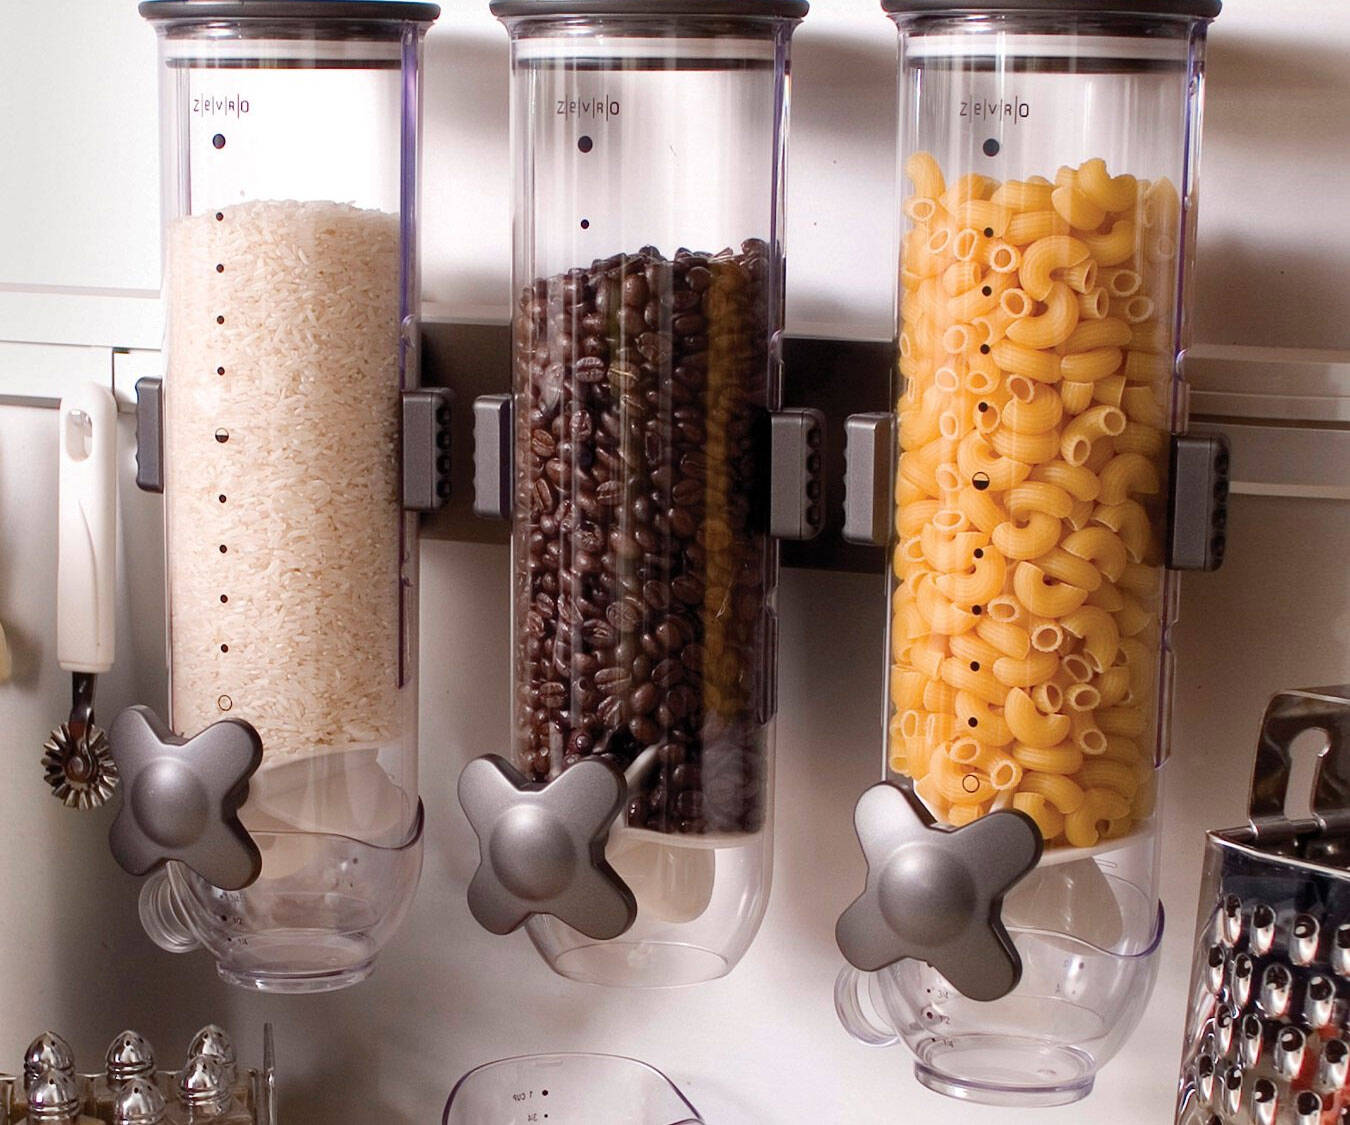 Wall Mounted Triple Dry Food Dispenser - coolthings.us